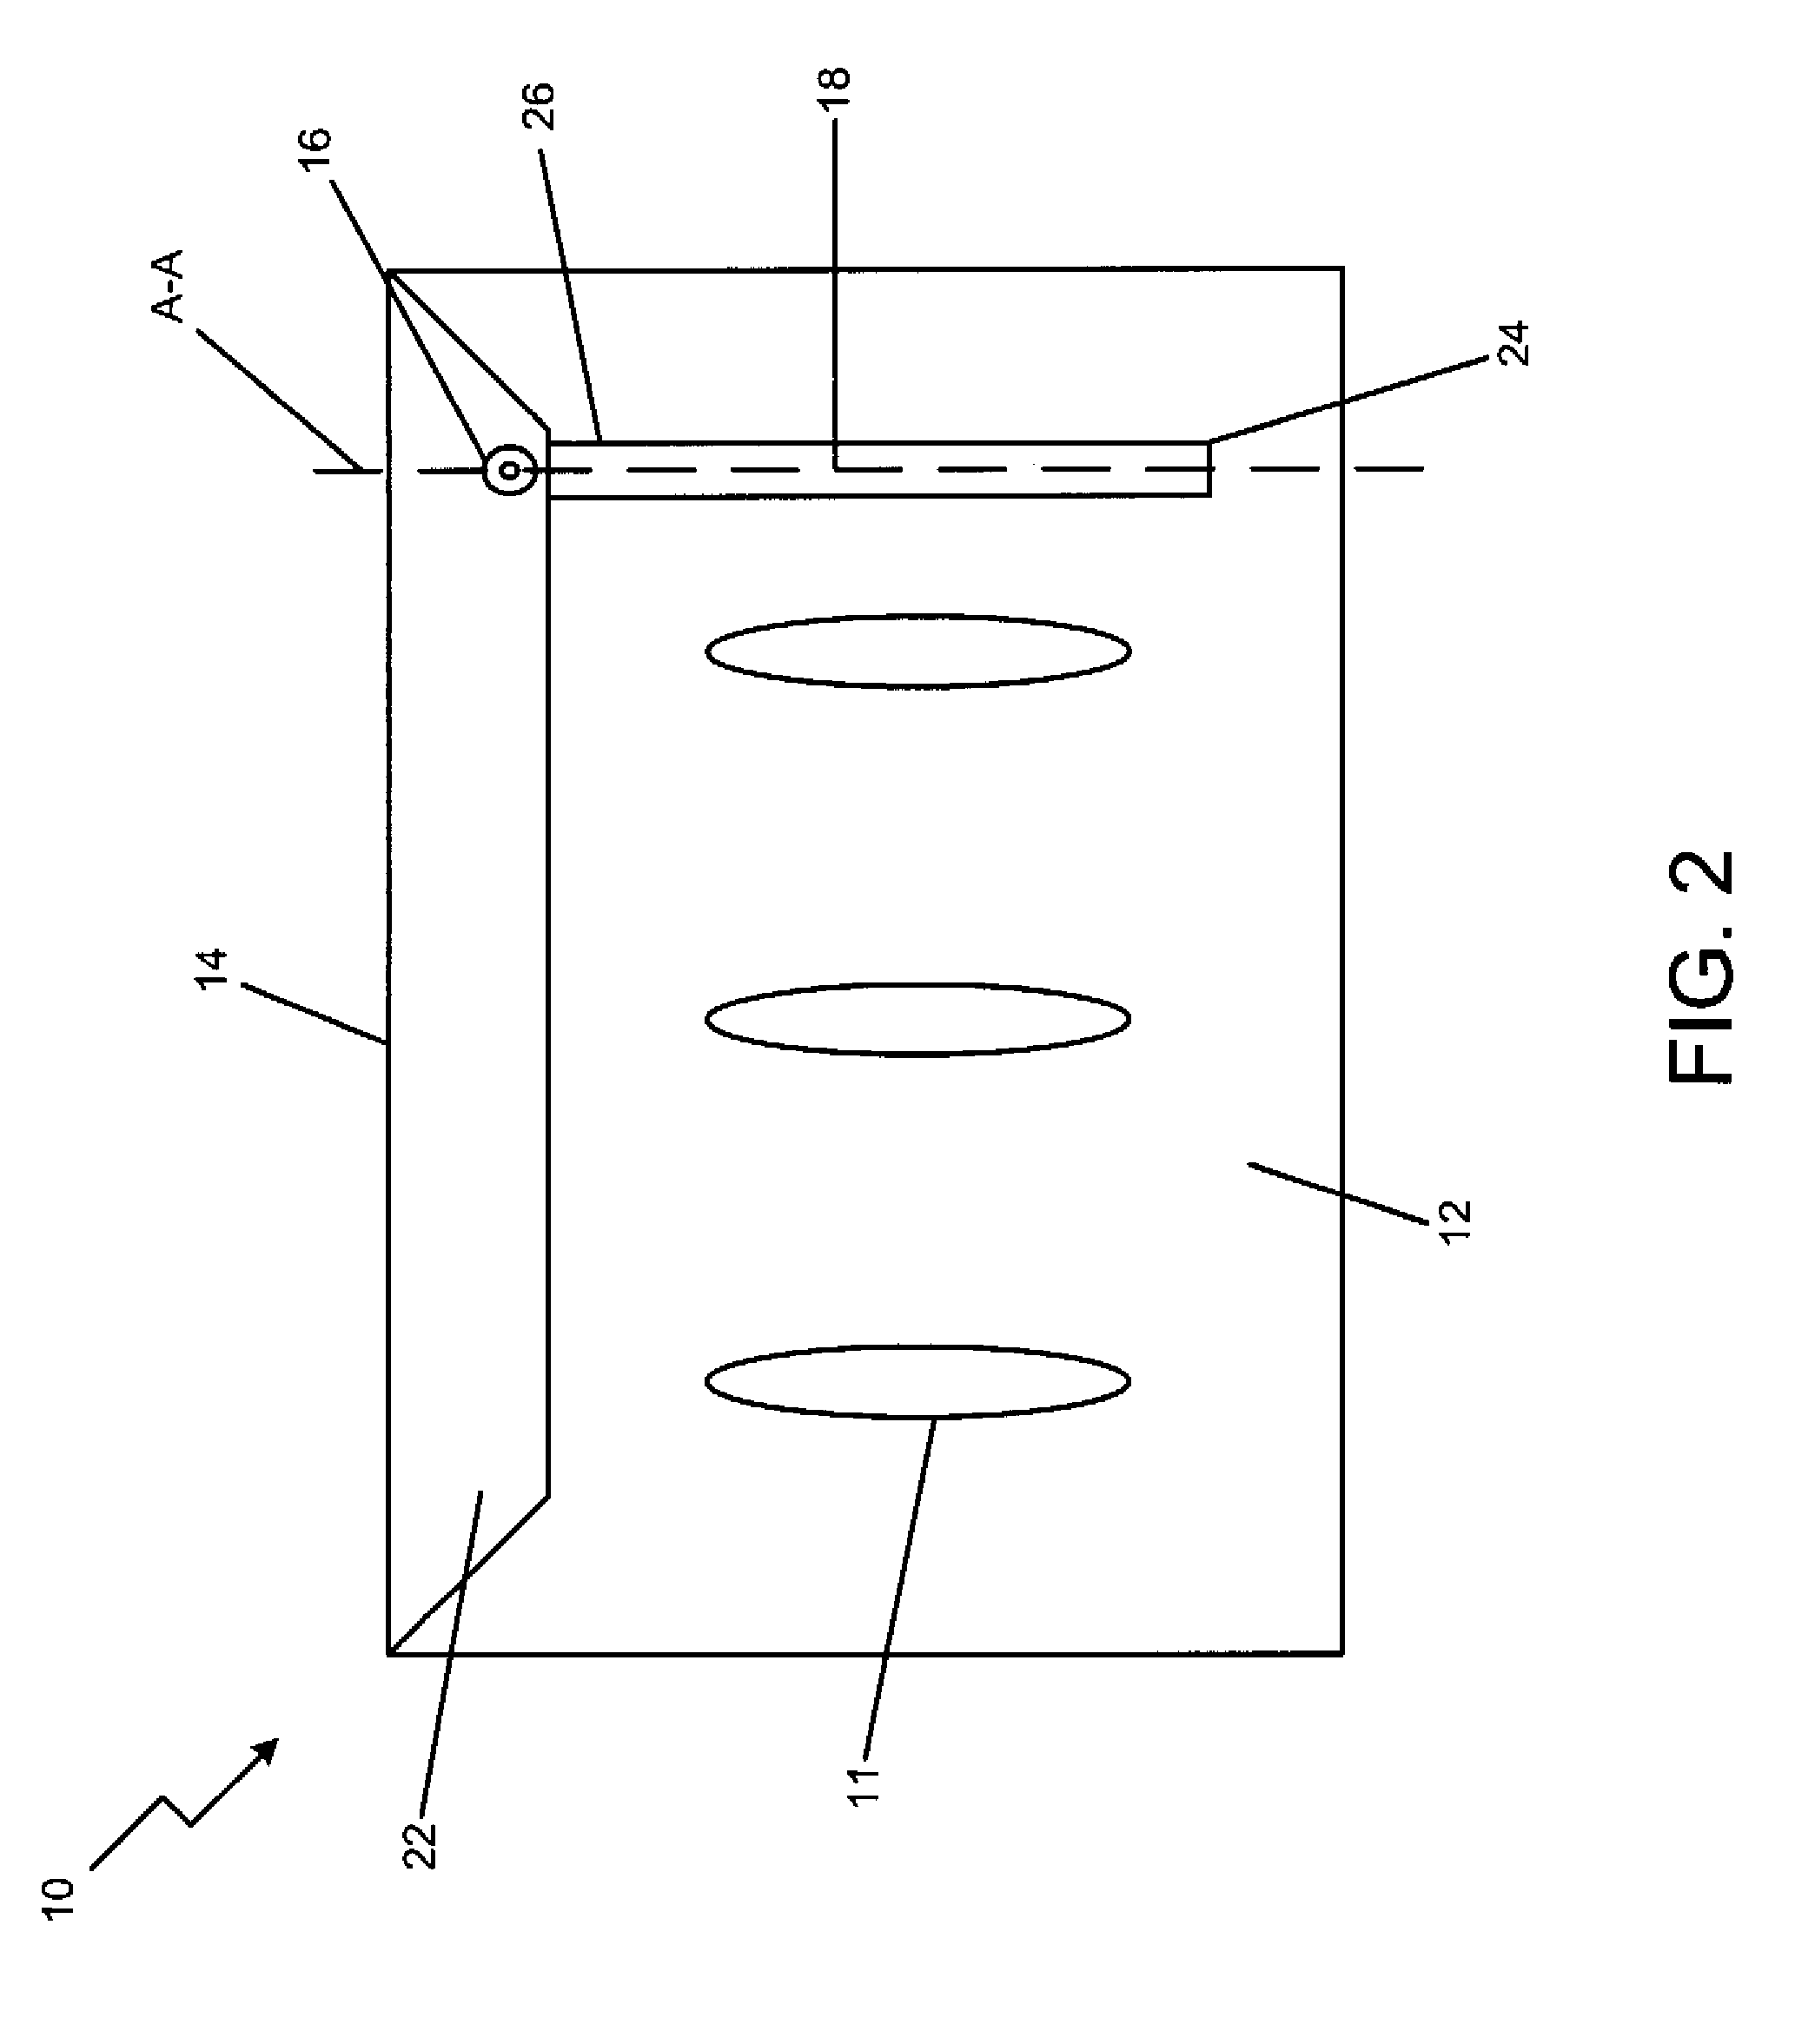 System and Method for Medical Instrument Sterilization Case having a Rotatably Displacing Cover